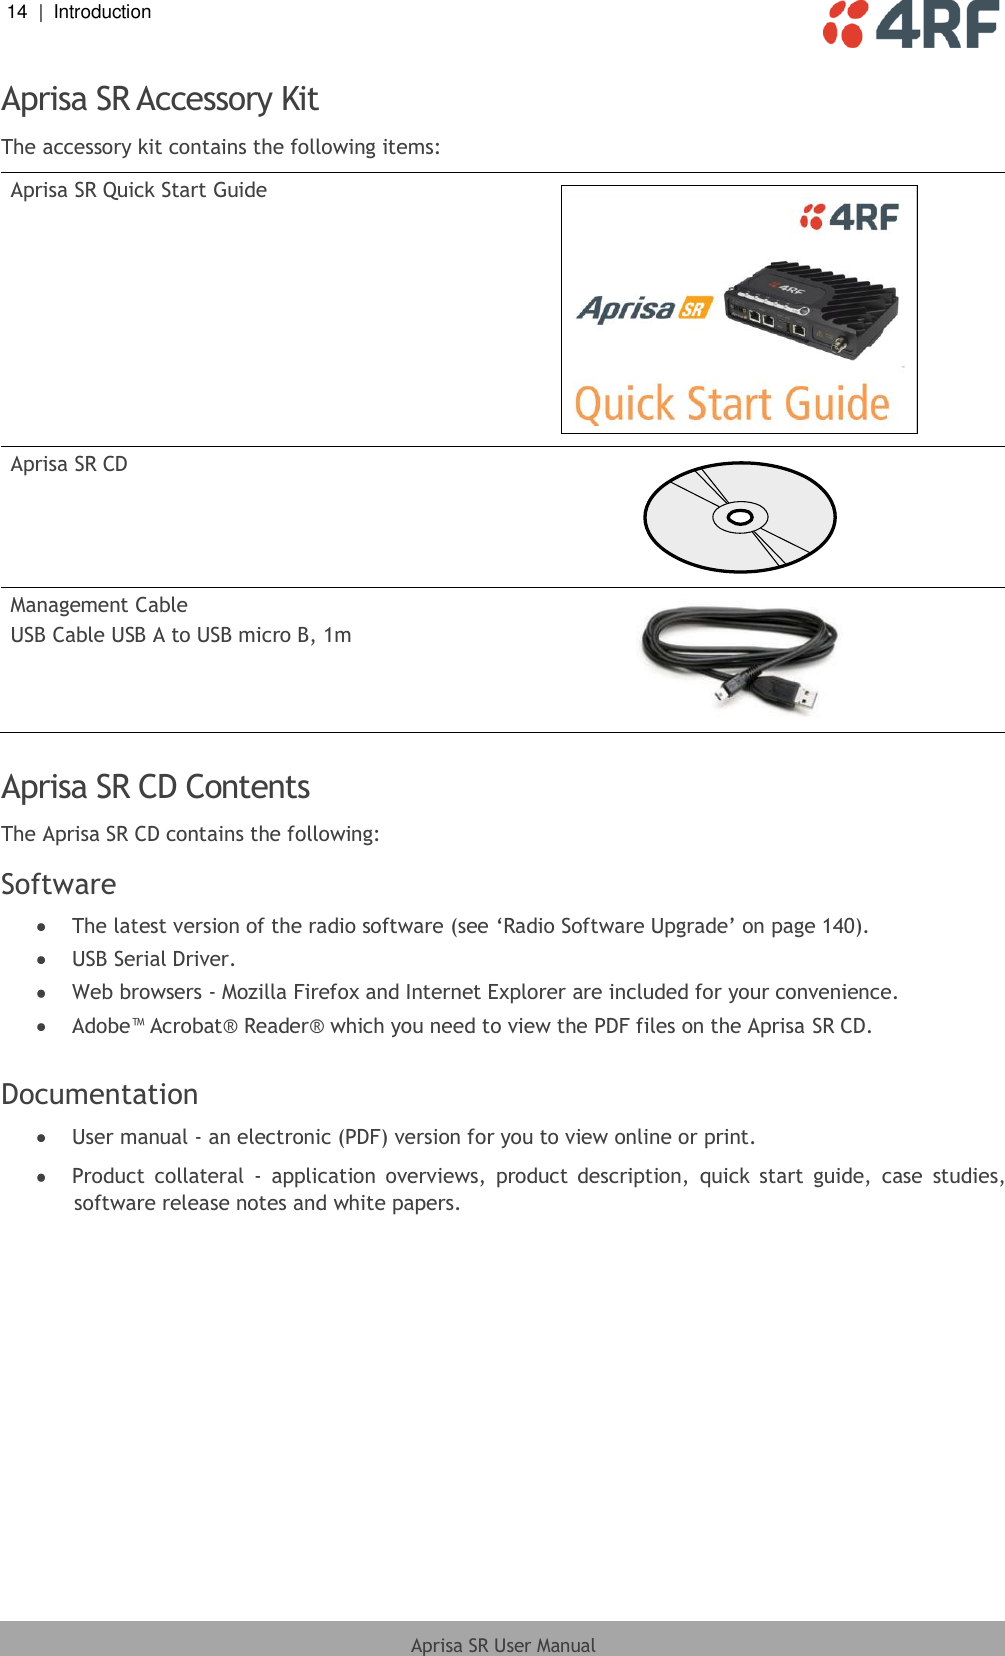 14  |  Introduction   Aprisa SR User Manual  Aprisa SR Accessory Kit The accessory kit contains the following items: Aprisa SR Quick Start Guide  Aprisa SR CD  Management Cable USB Cable USB A to USB micro B, 1m   Aprisa SR CD Contents The Aprisa SR CD contains the following: Software  The latest version of the radio software (see ‘Radio Software Upgrade’ on page 140).  USB Serial Driver.  Web browsers - Mozilla Firefox and Internet Explorer are included for your convenience.  Adobe™ Acrobat® Reader® which you need to view the PDF files on the Aprisa SR CD.  Documentation  User manual - an electronic (PDF) version for you to view online or print.  Product  collateral  -  application  overviews,  product  description,  quick  start  guide,  case  studies, software release notes and white papers.   